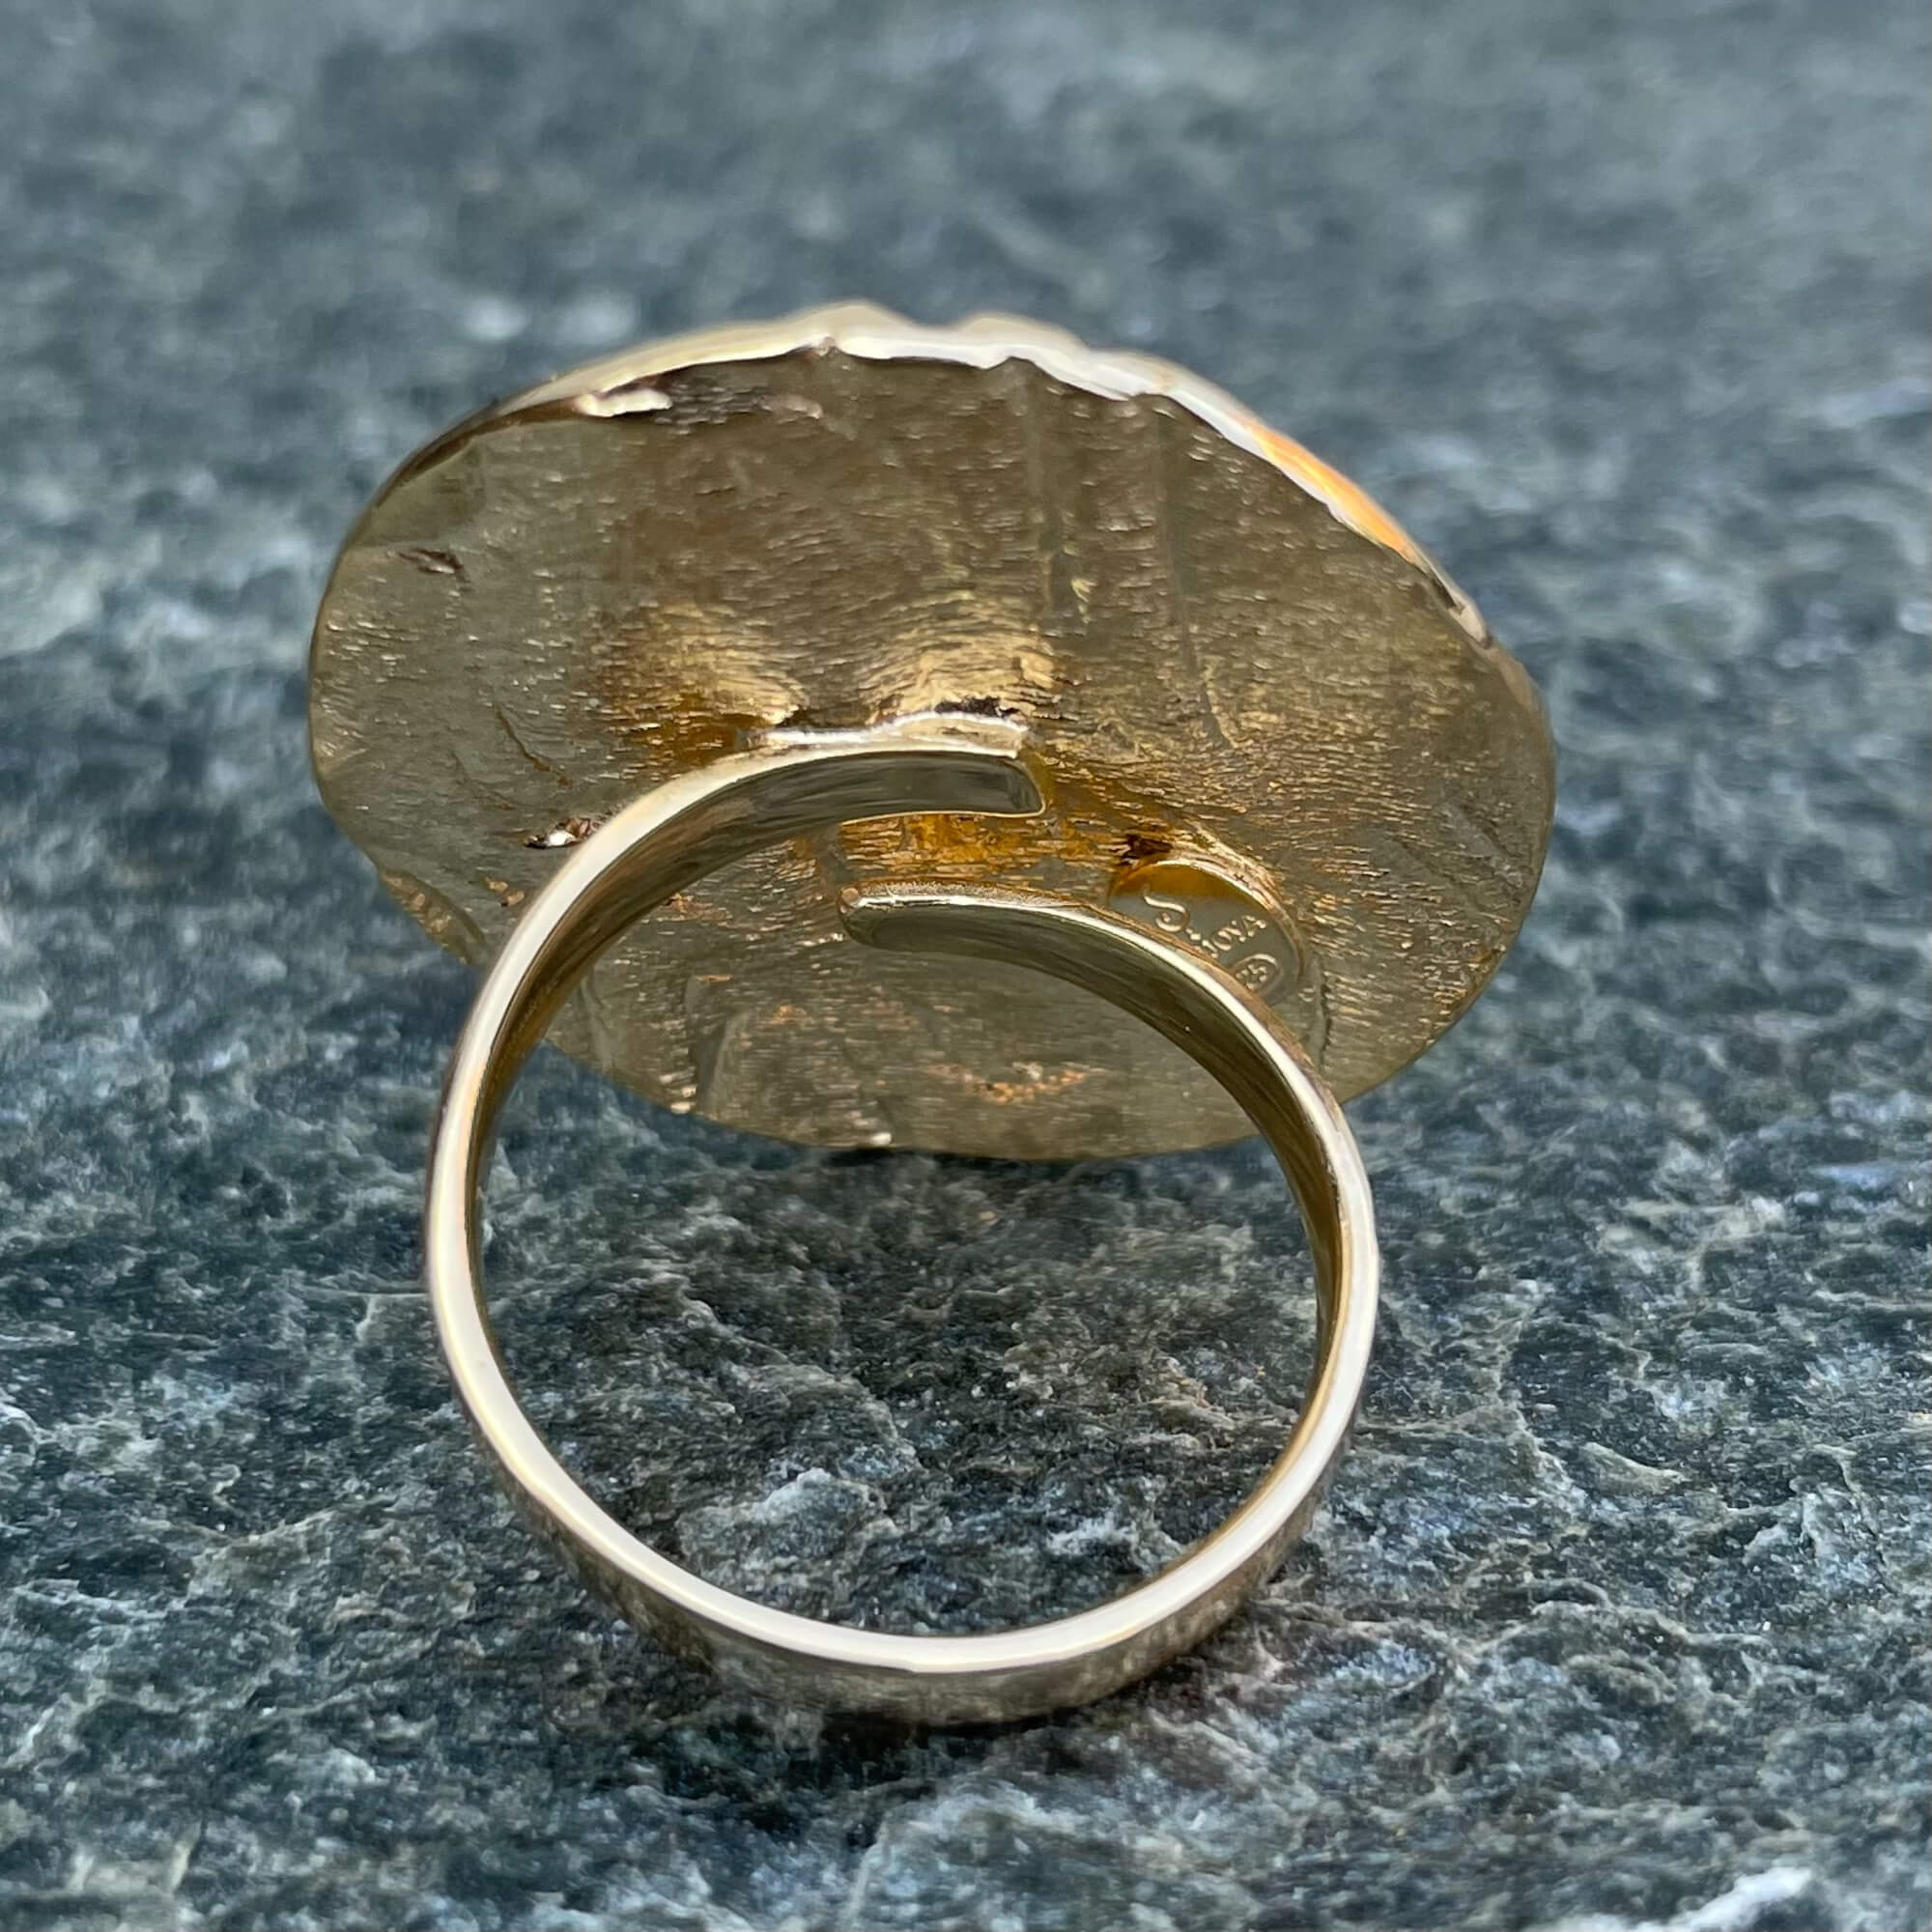 Created round ring made of gold-plated silver